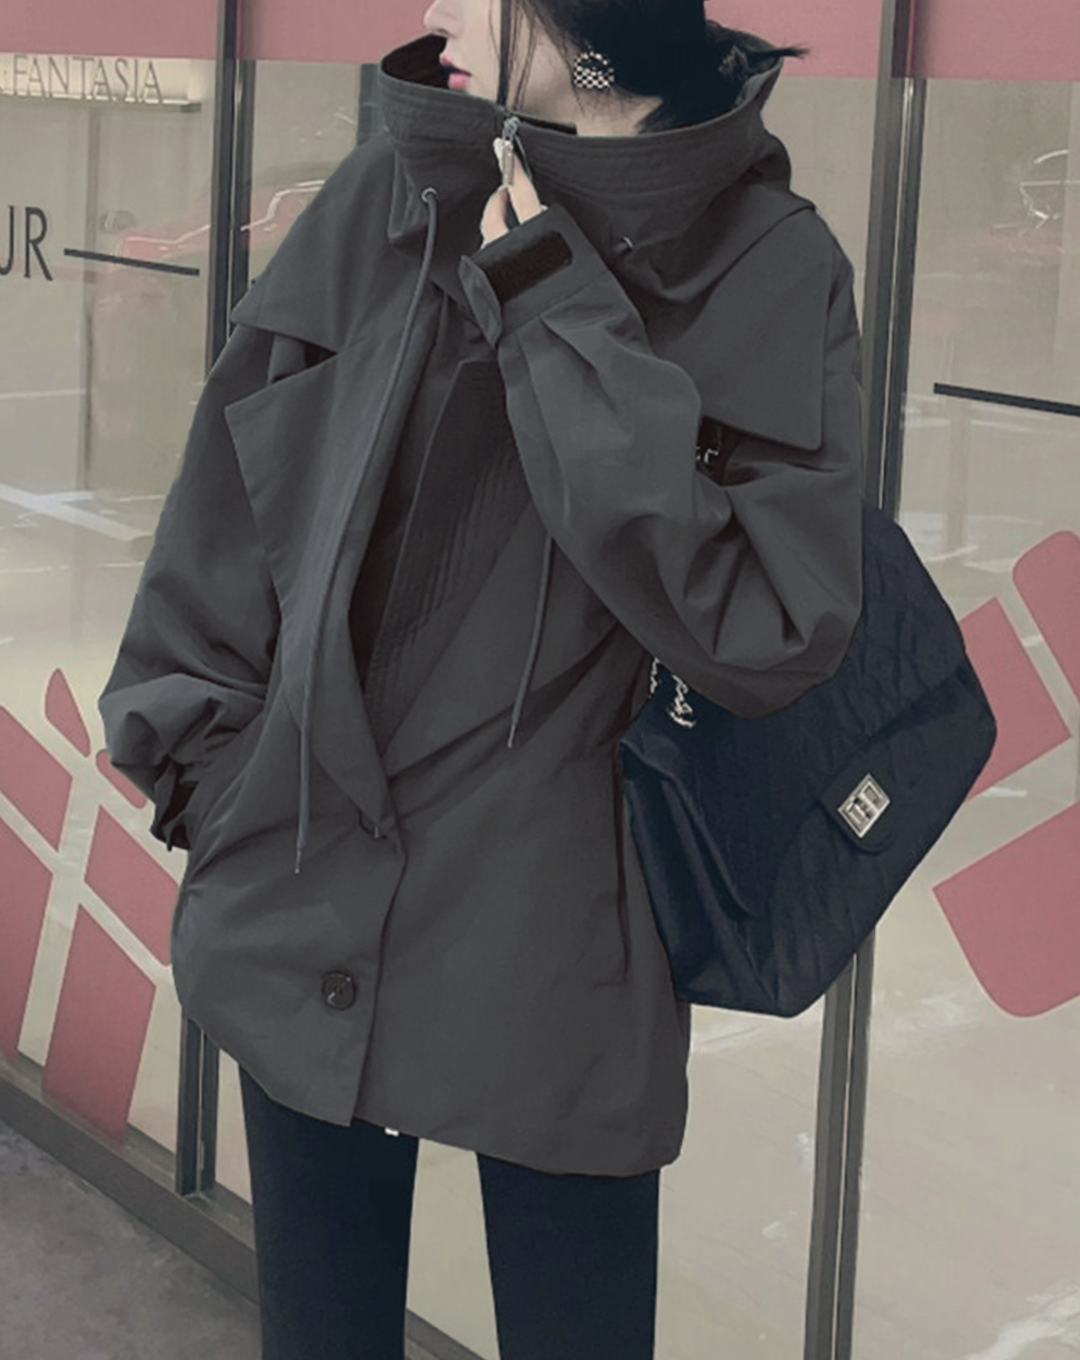 ♀Big Hooded Middle Trench Coat